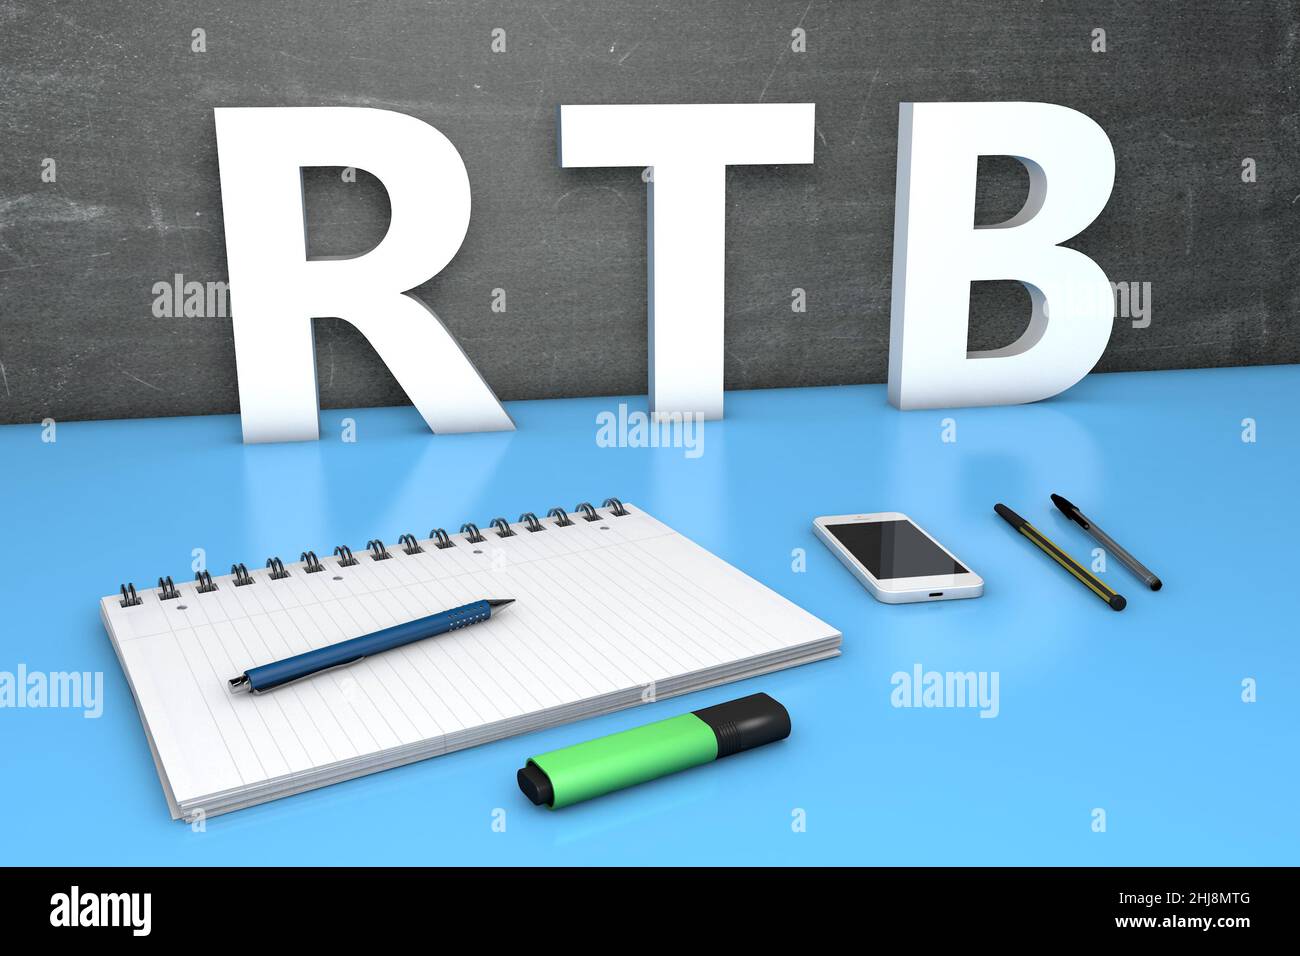 RTB - Real Time Bidding - text concept with chalkboard, notebook, pens and mobile phone. 3D render illustration. Stock Photo